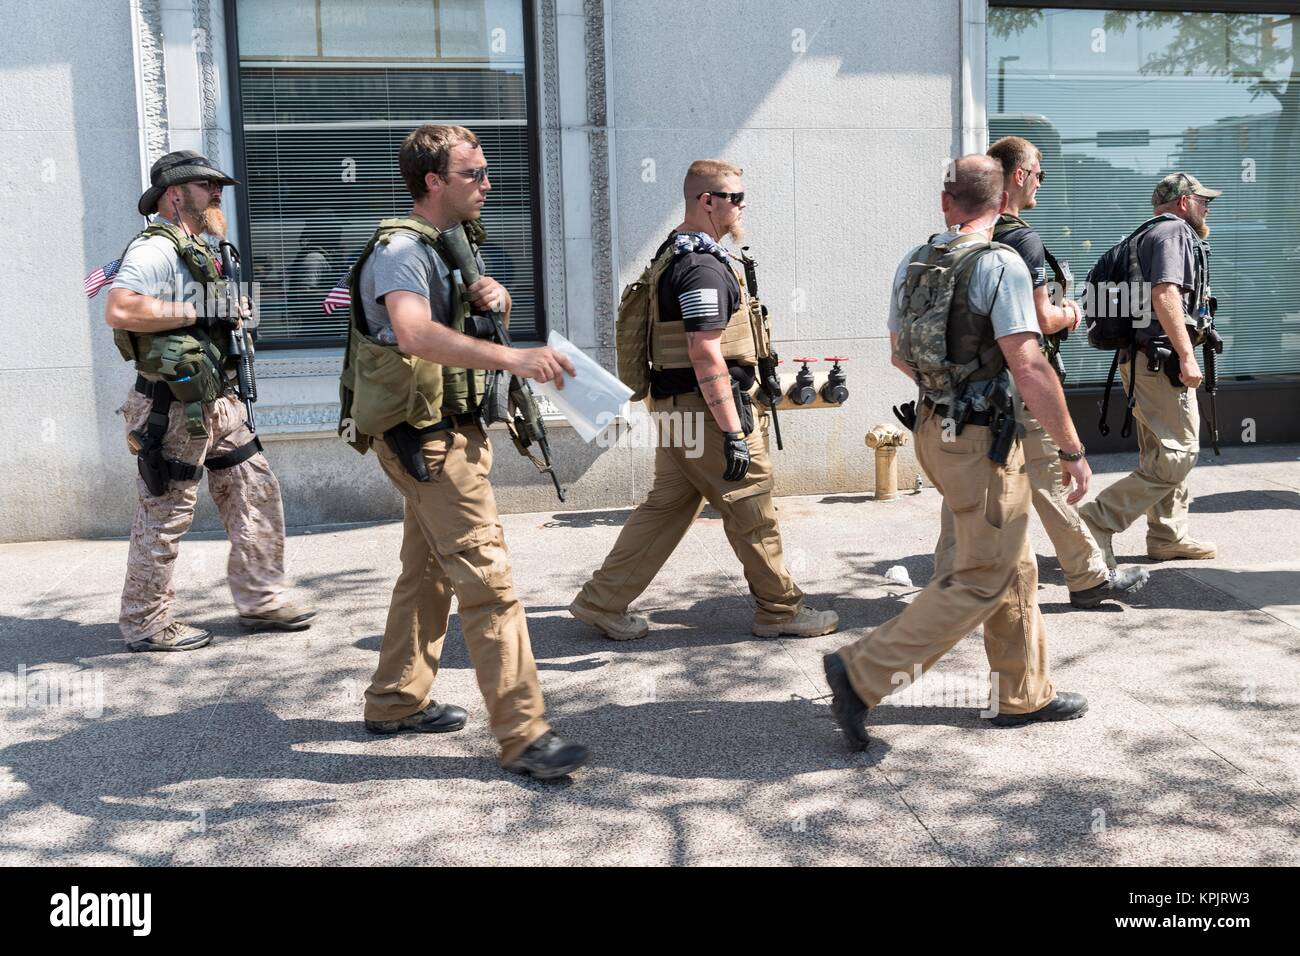 Members of an Ohio militia group protest by openly carrying military style semi-automatic weapons downtown near the Republican National Convention July 19, 2016 in Cleveland, Ohio. Stock Photo